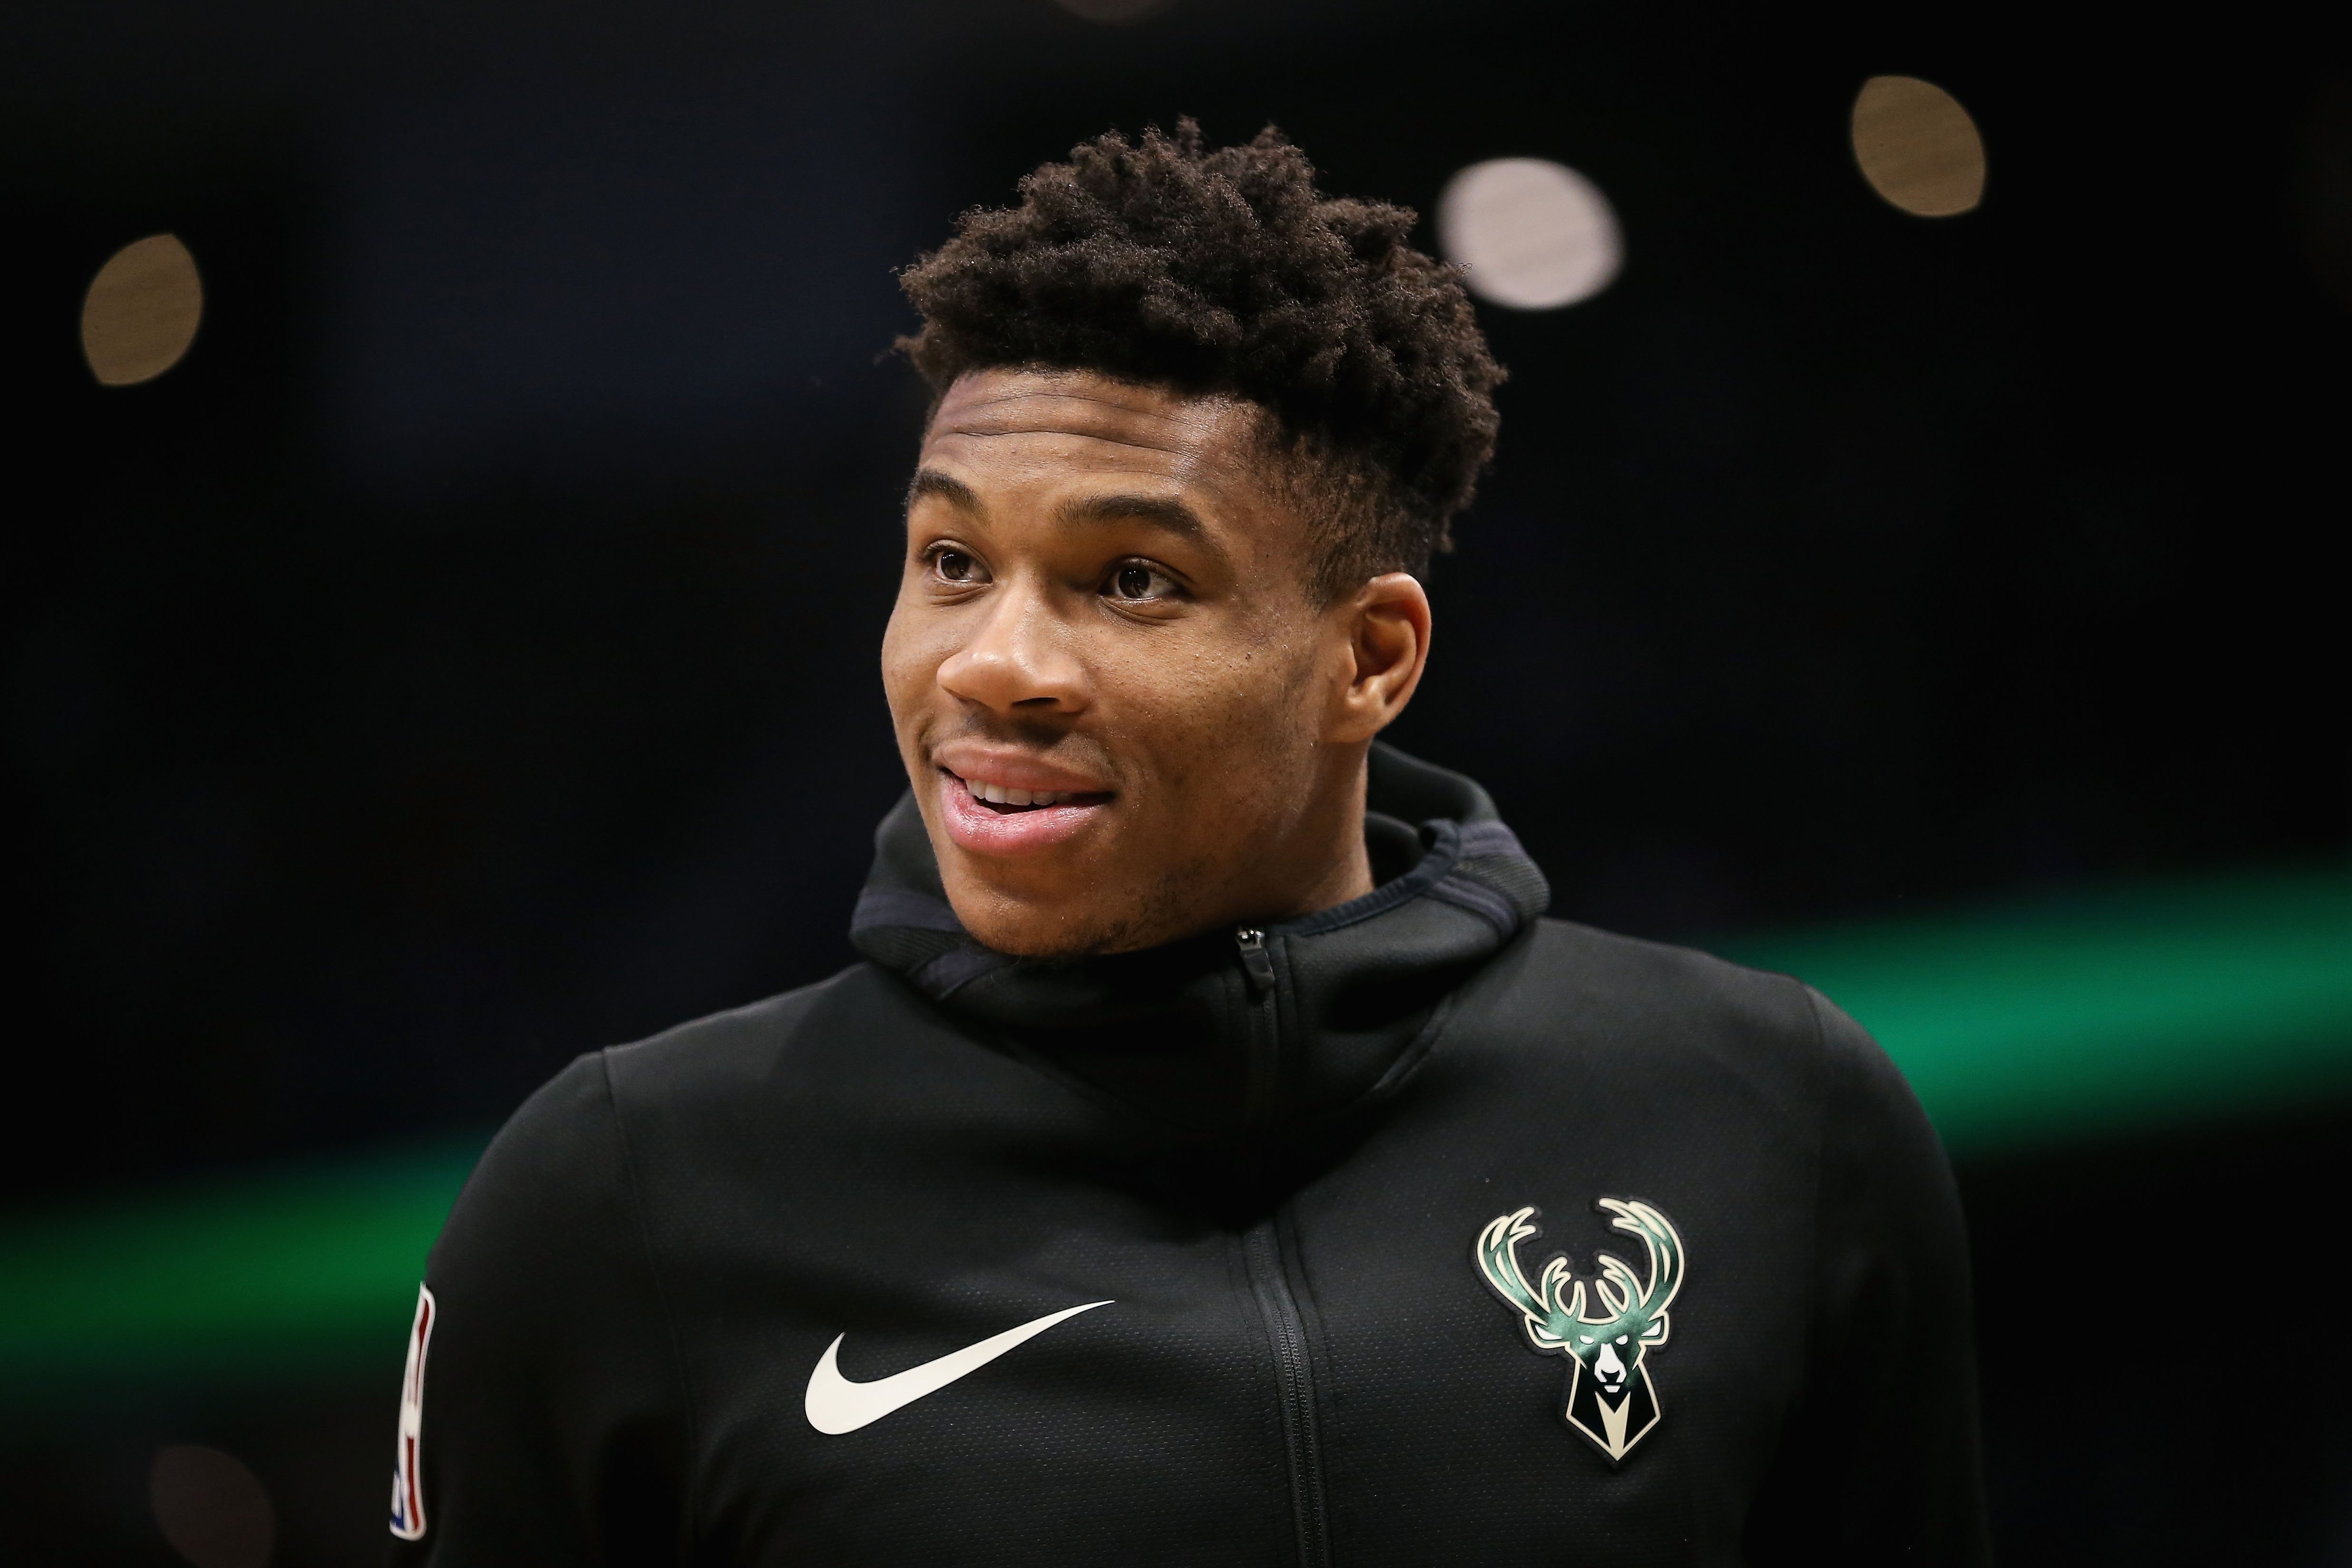 Giannis Antetokounmpo Made the Most Humble First Purchase After Signing His $228 Million Deal With the Bucks